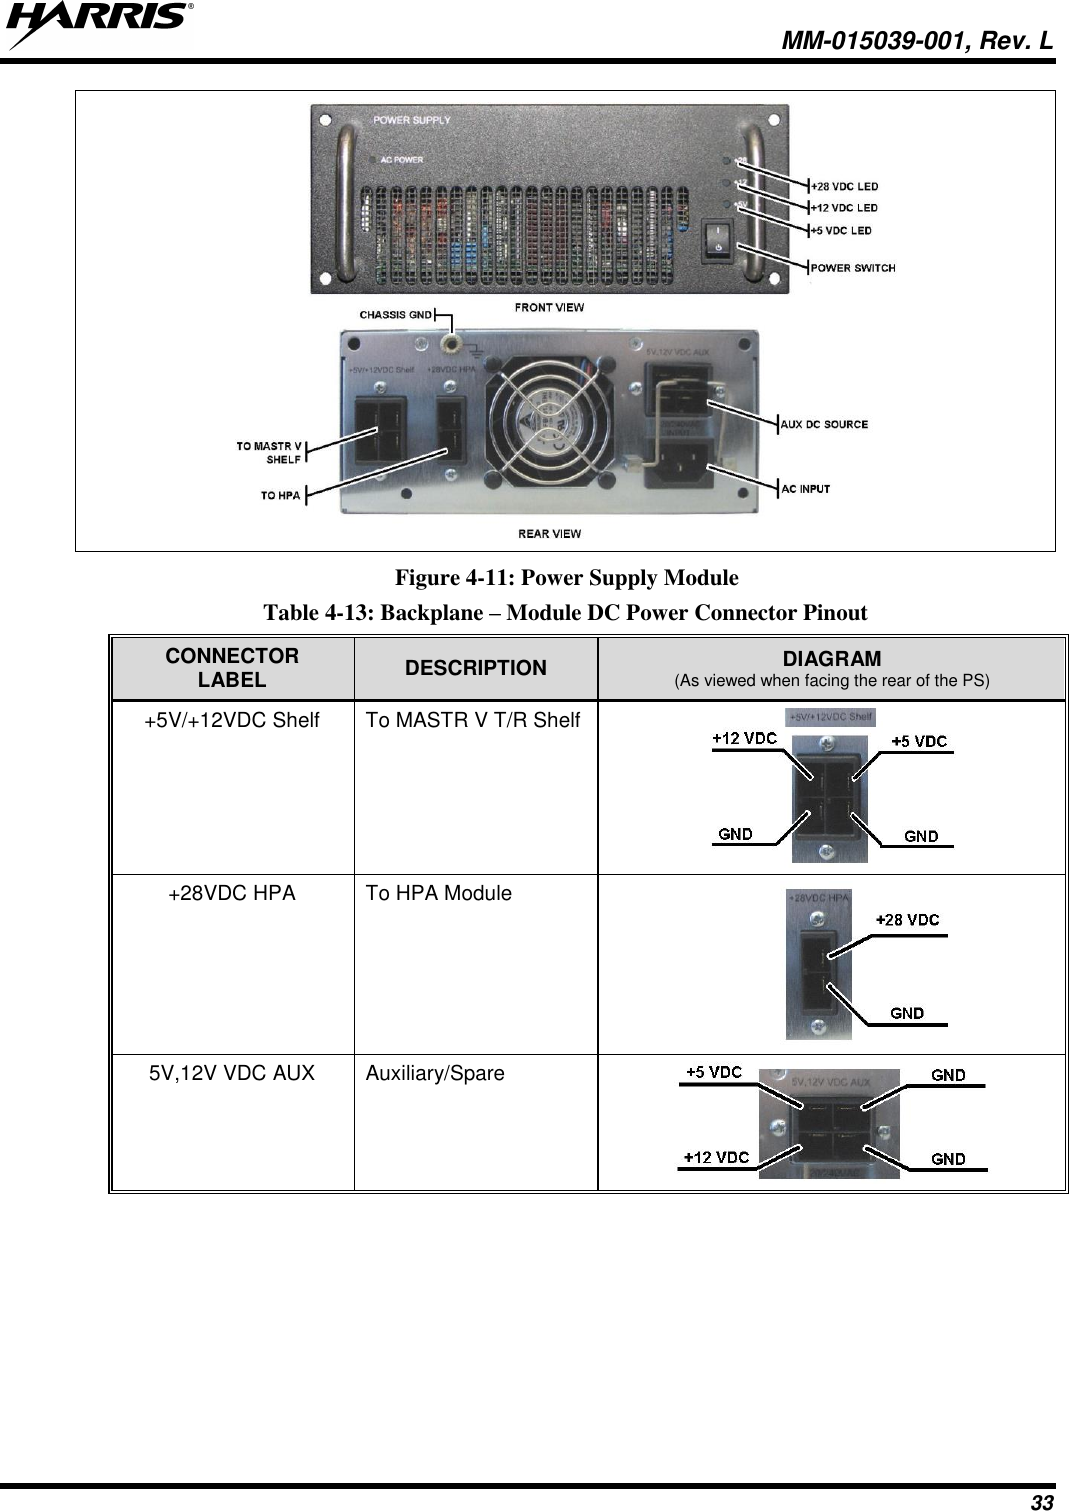   MM-015039-001, Rev. L 33  Figure 4-11: Power Supply Module Table 4-13: Backplane – Module DC Power Connector Pinout CONNECTOR LABEL DESCRIPTION DIAGRAM (As viewed when facing the rear of the PS) +5V/+12VDC Shelf To MASTR V T/R Shelf  +28VDC HPA To HPA Module                                5V,12V VDC AUX Auxiliary/Spare   